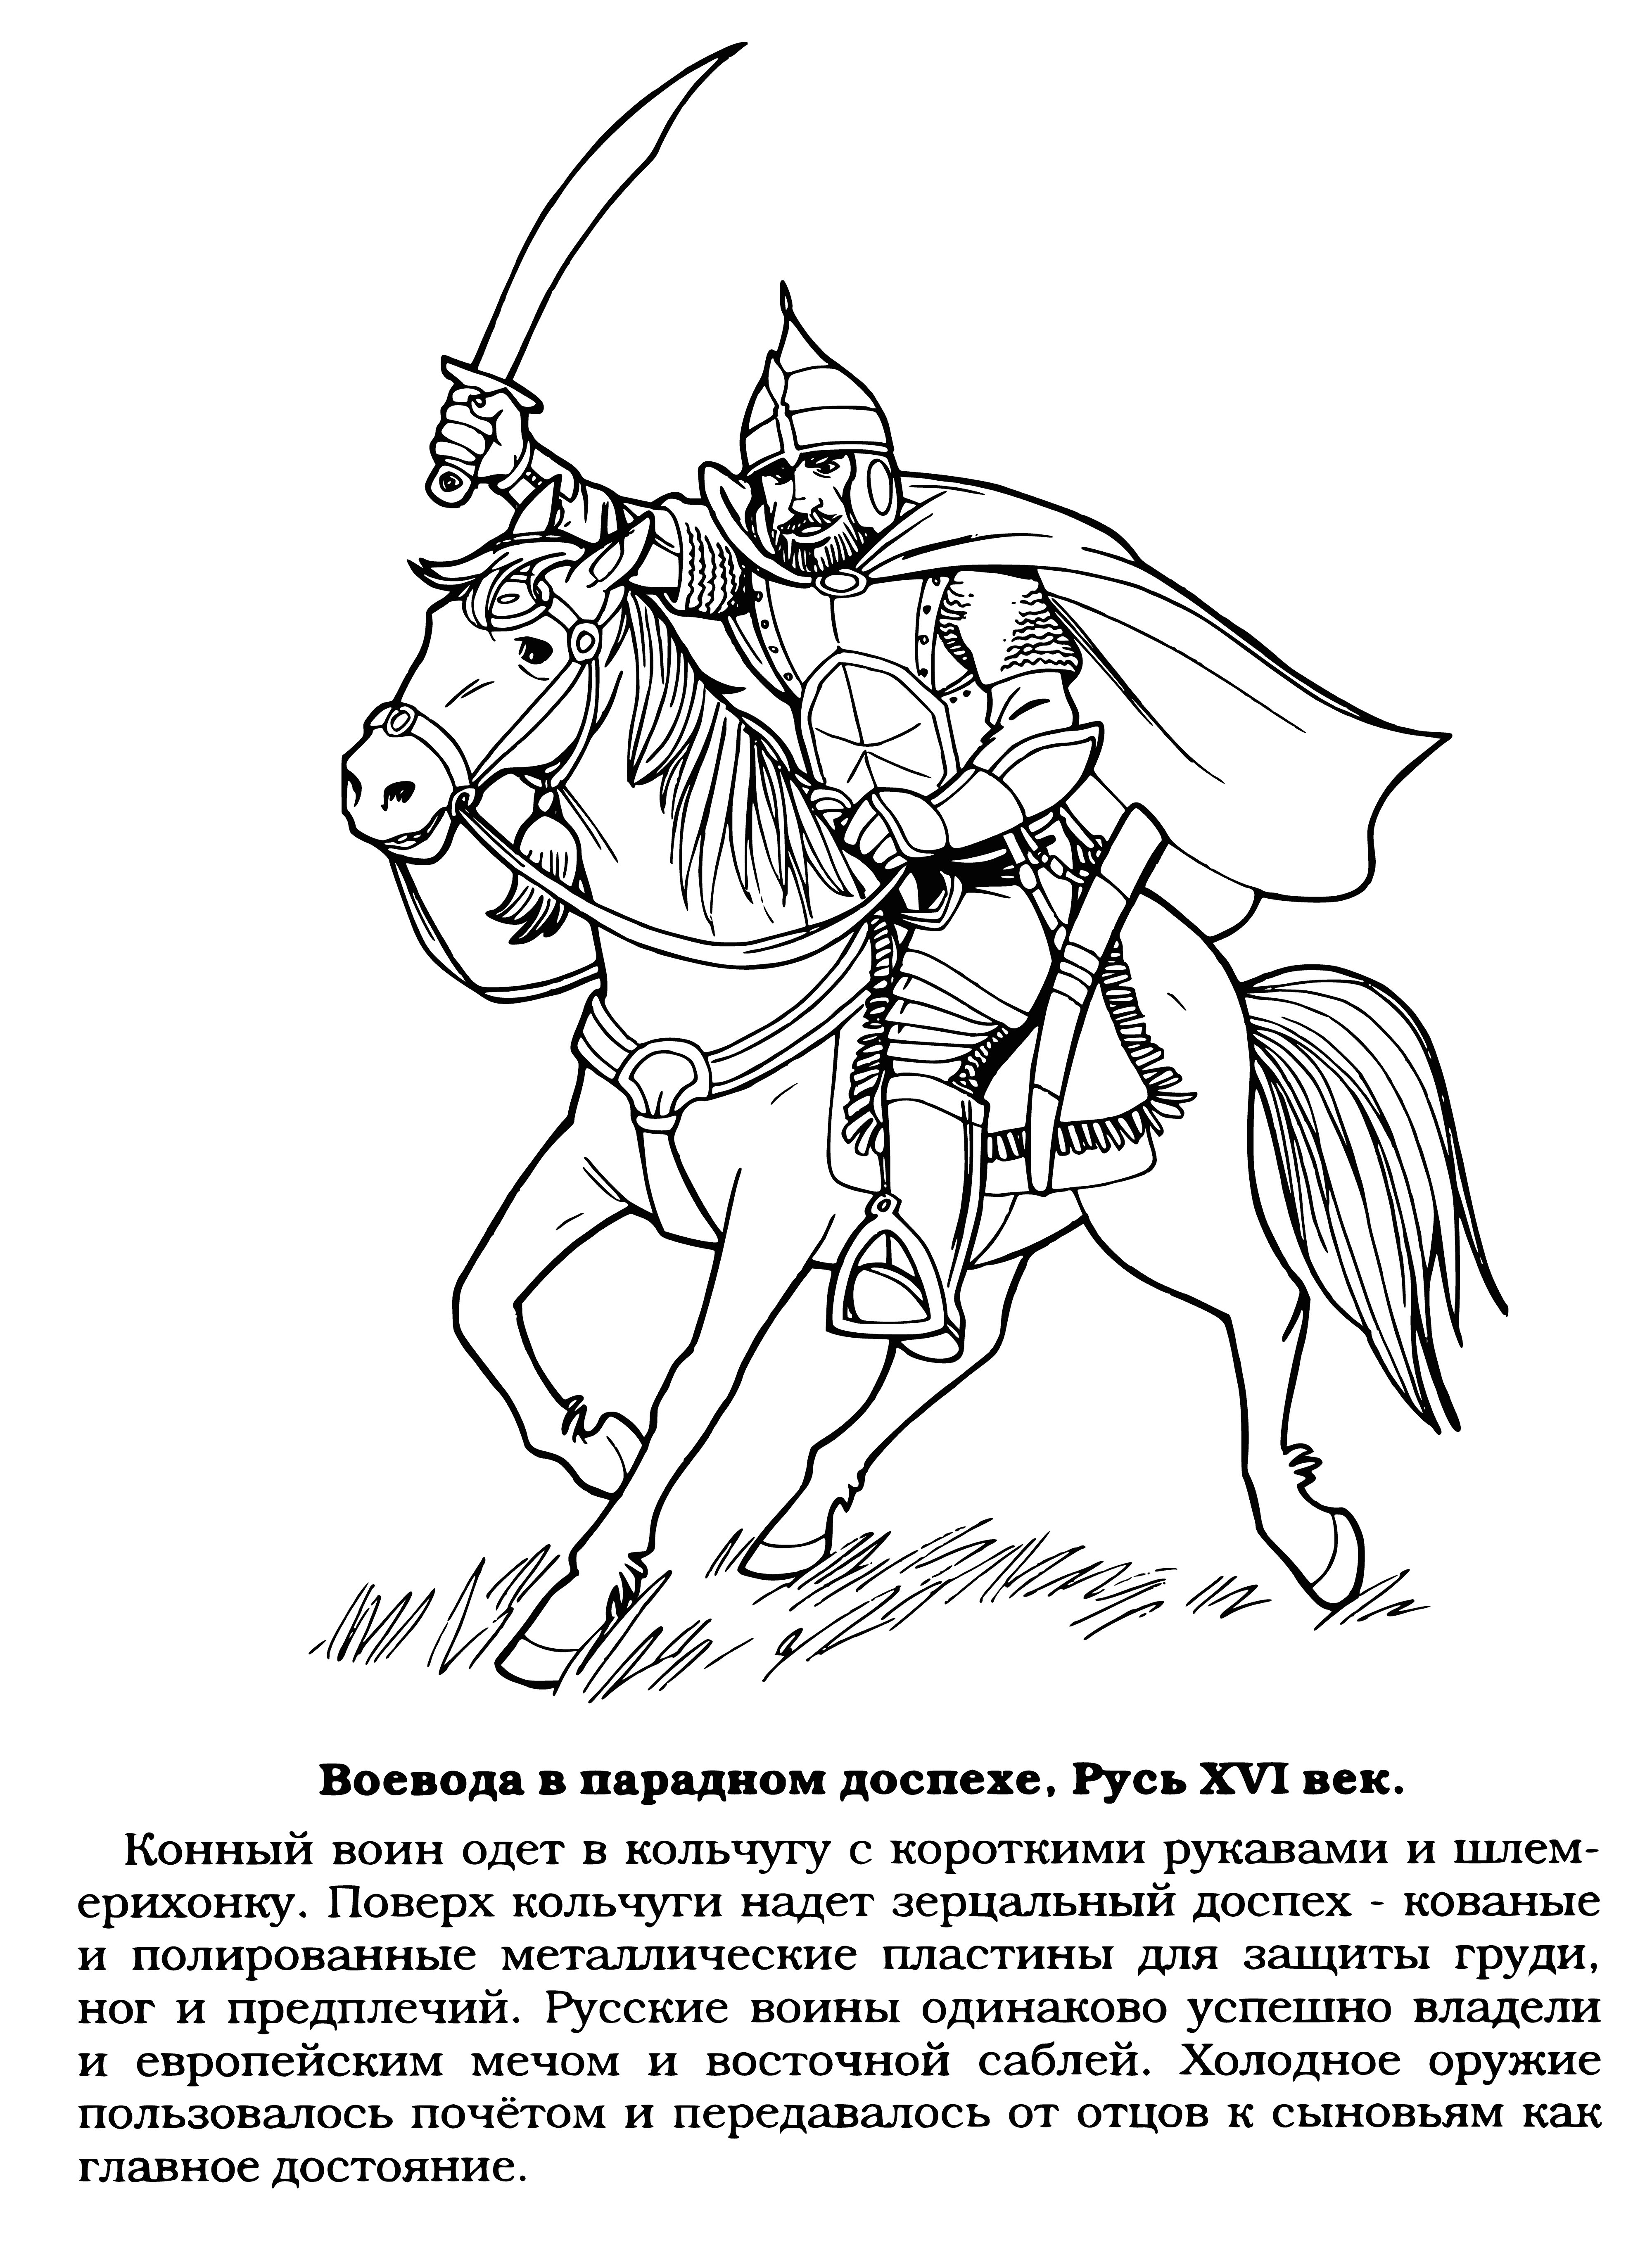 coloring page: A Voivode dressed in ceremonial armor & carrying a sword: a symbol of power & authority, skilled & brave warrior respected by soldiers.